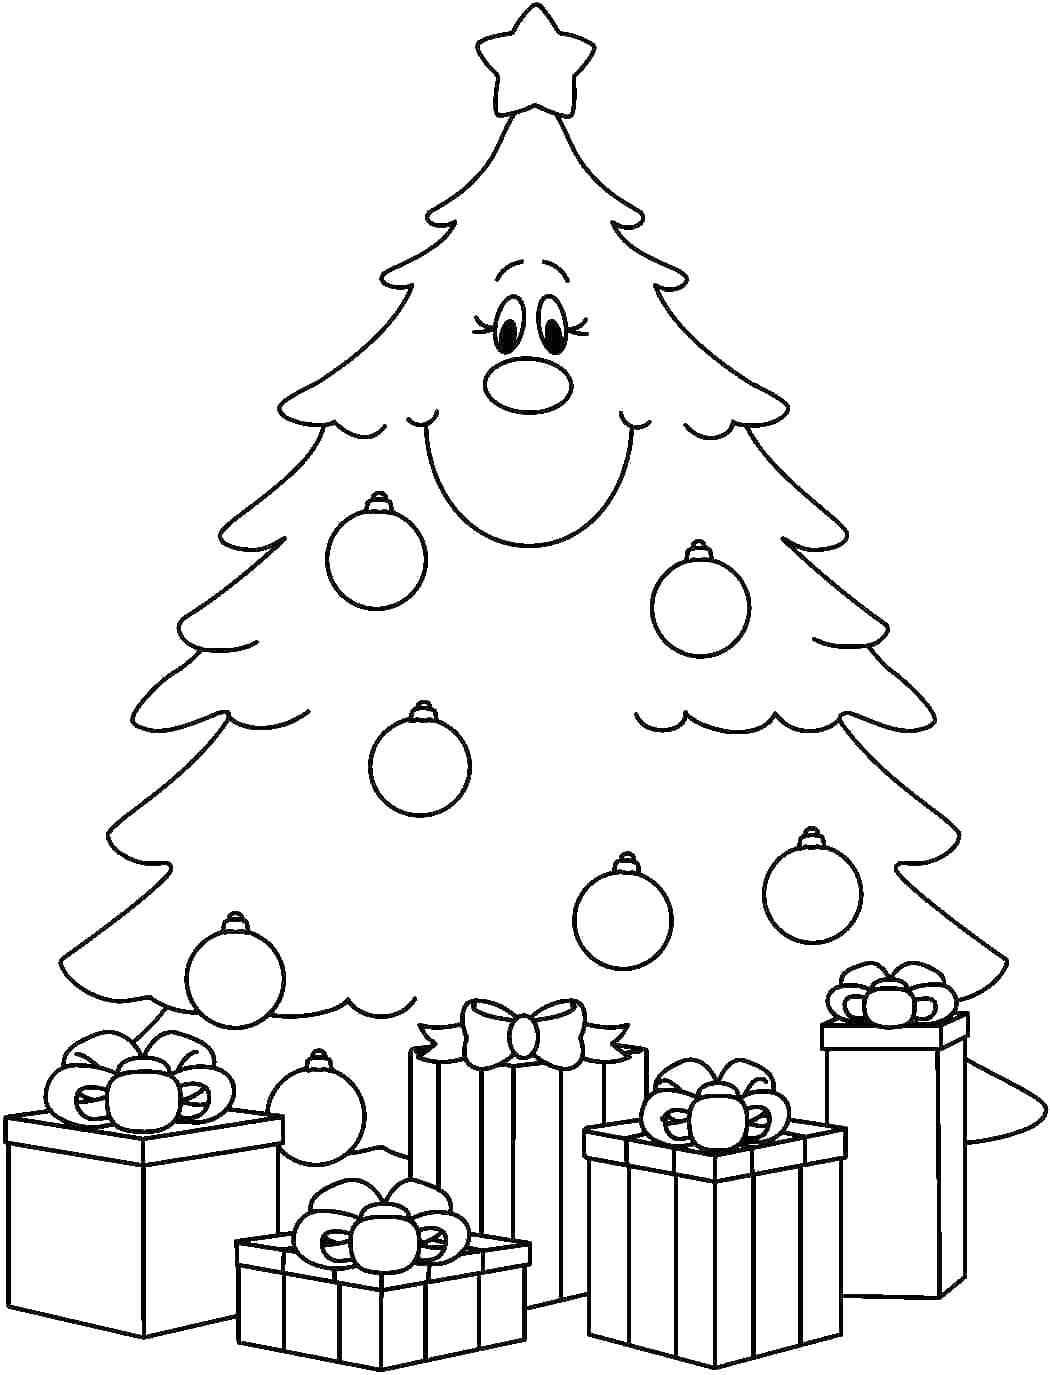 Mysterious Gifts Under The Tree Coloring Page